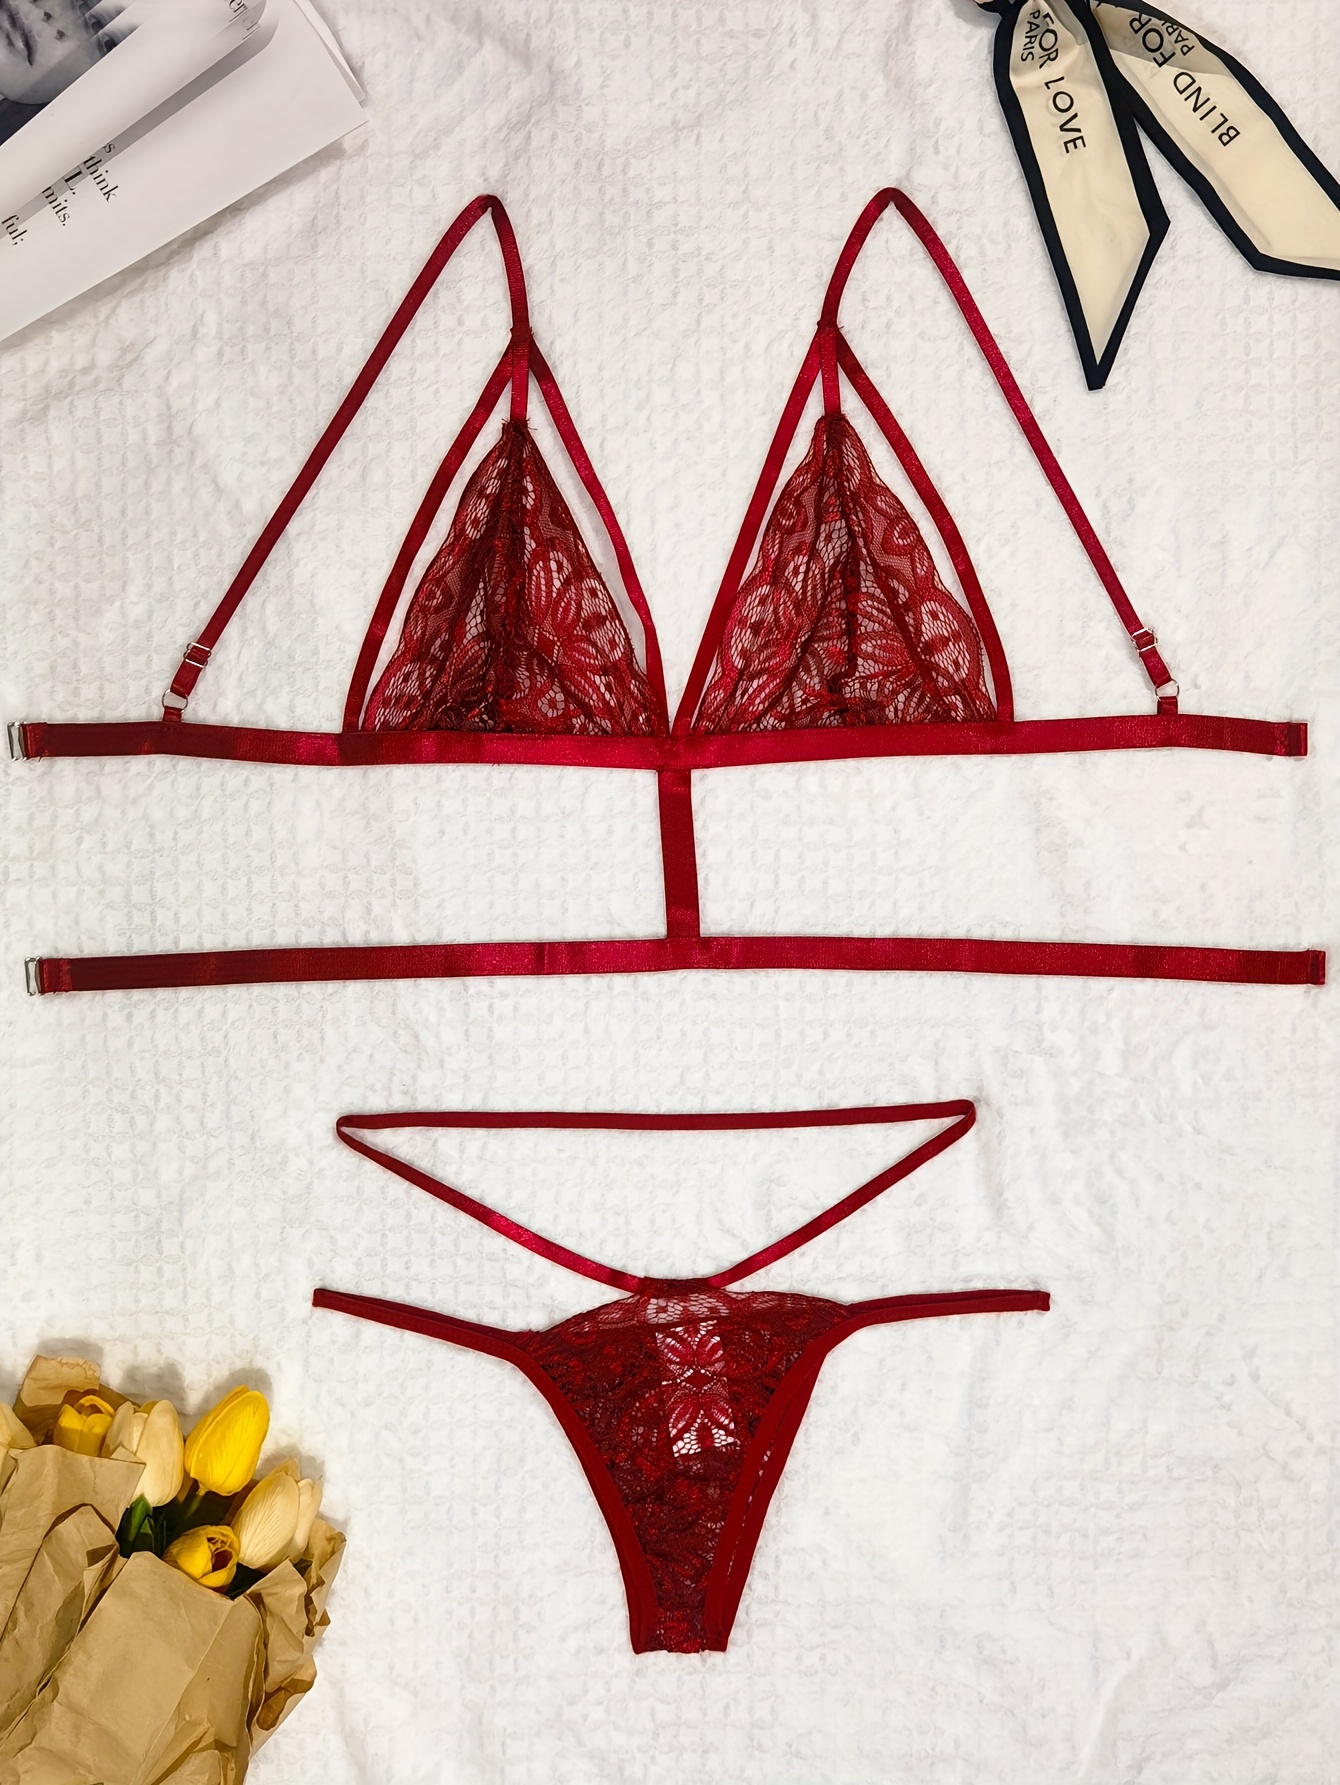 Cherry Embroidery Lingerie Set, Sheer Unlined Bra & Mesh Thong, Women's  Sexy Lingerie & Underwear